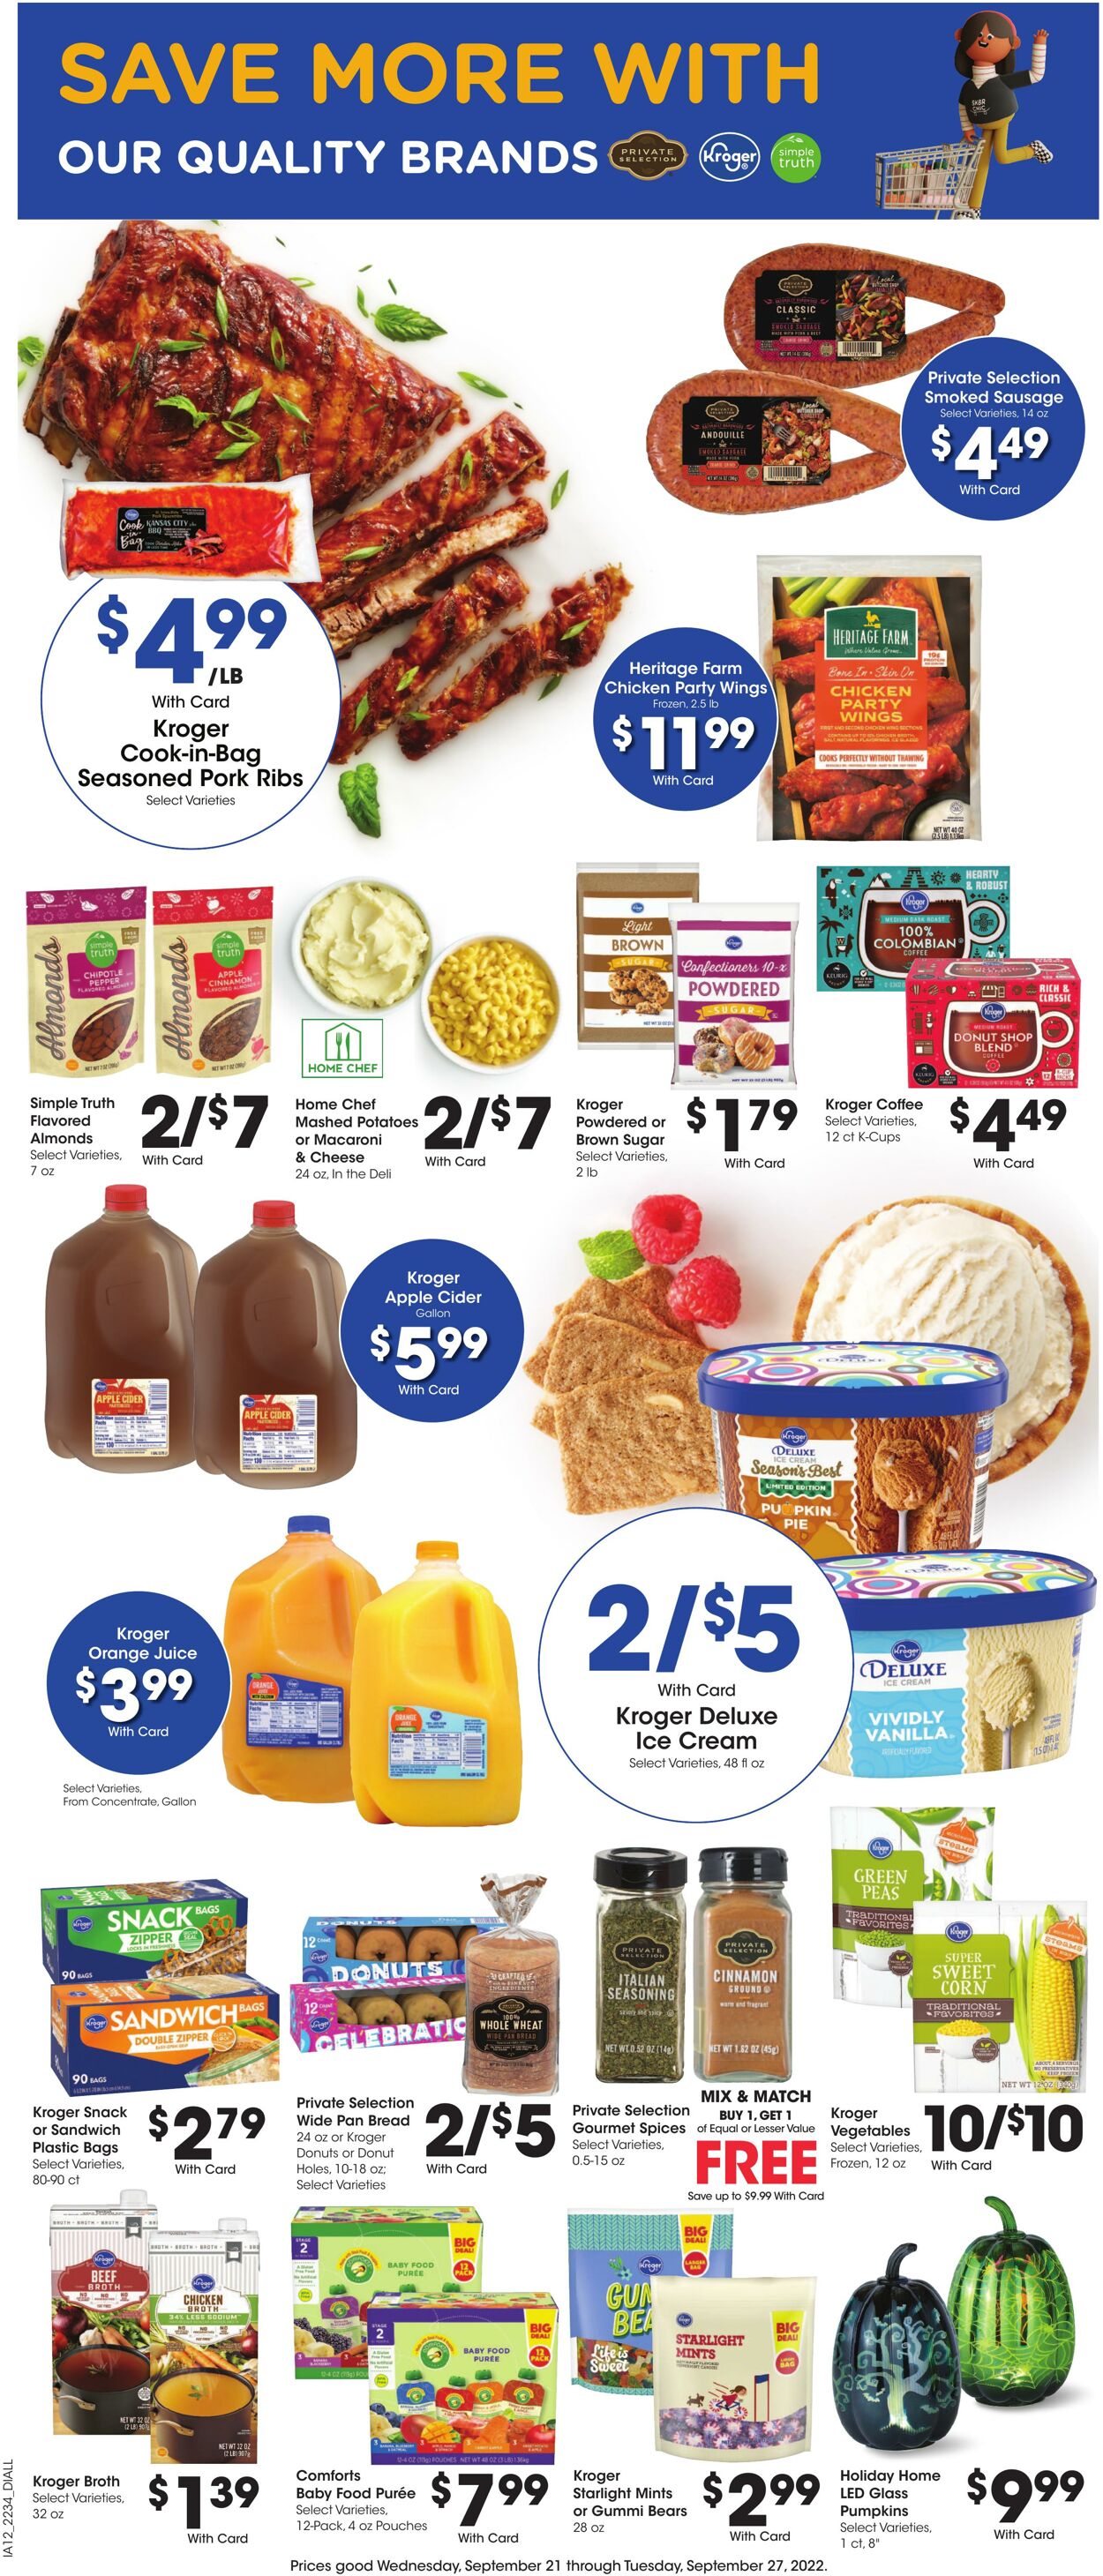 Weekly ad Gerbes Supermarkets 09/21/2022 - 09/27/2022